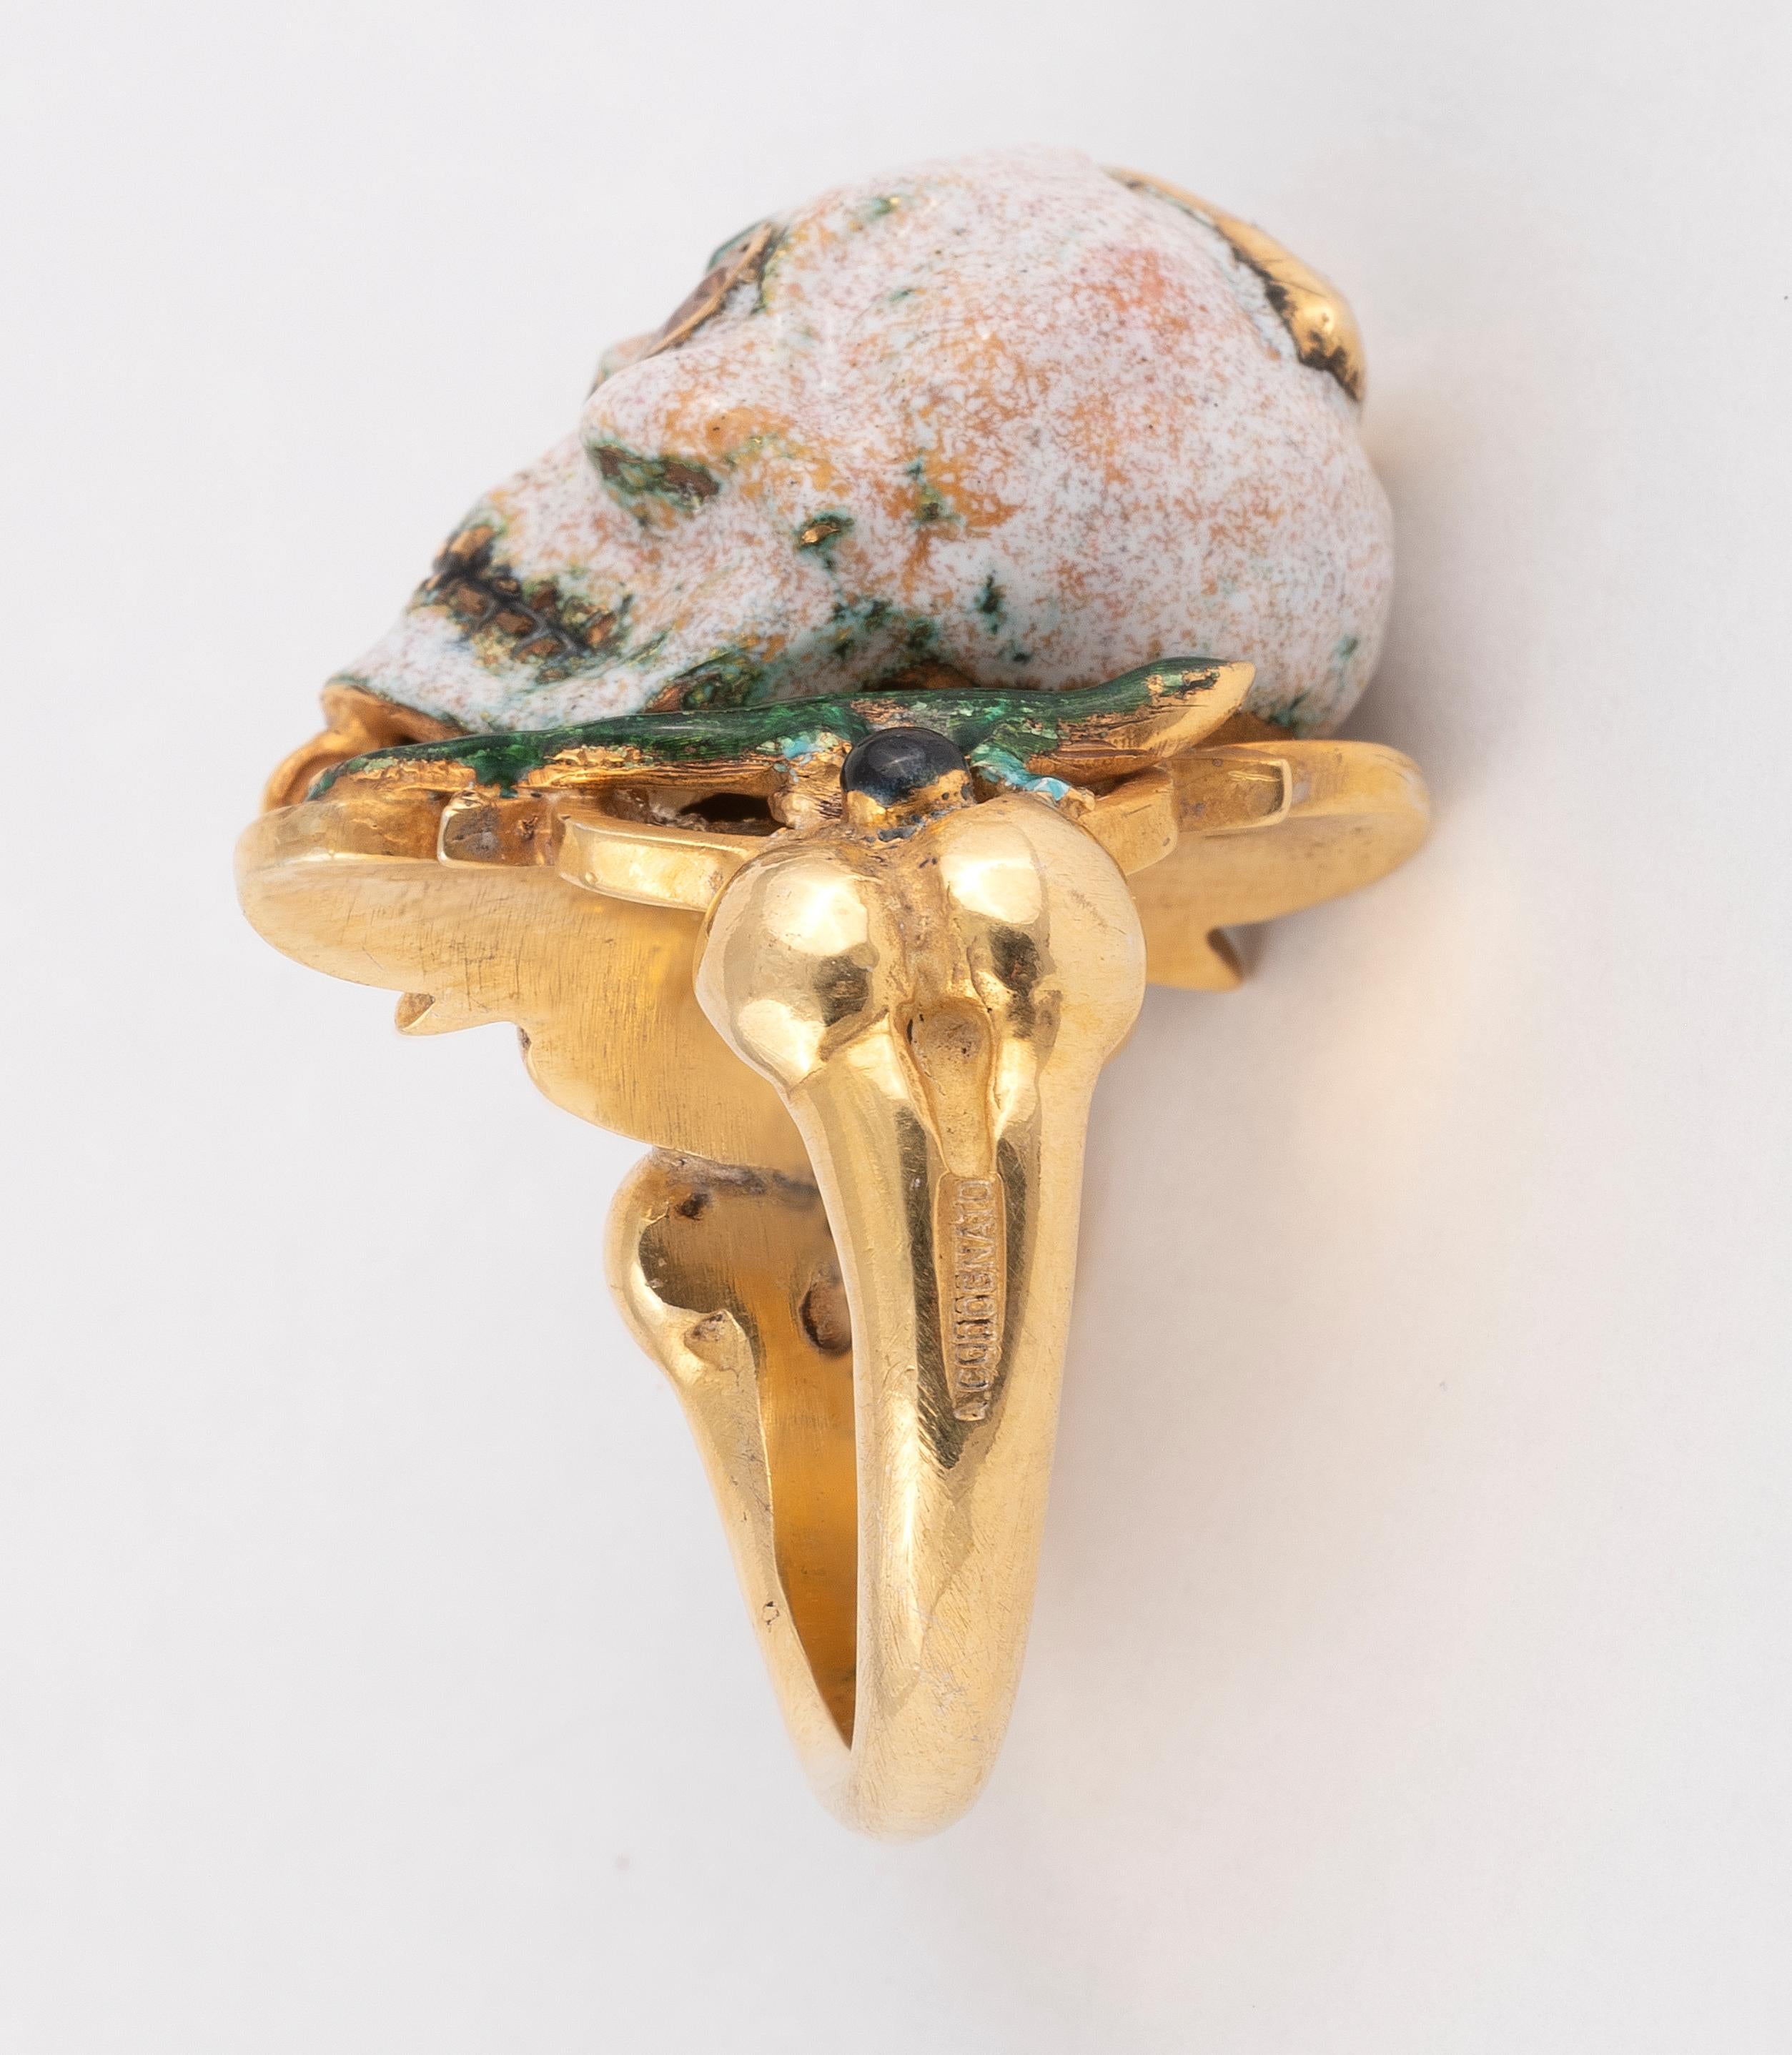 The Renaissance style Memento Mori skull with a lizard ring made with champleve multicolored enamels, round cut diamonds eyes and pear cut diamond at the top.

Mounted in 18Kt yellow gold

Size 7 1/2

Signed A. Codognato Venezia

Weight: 25.2